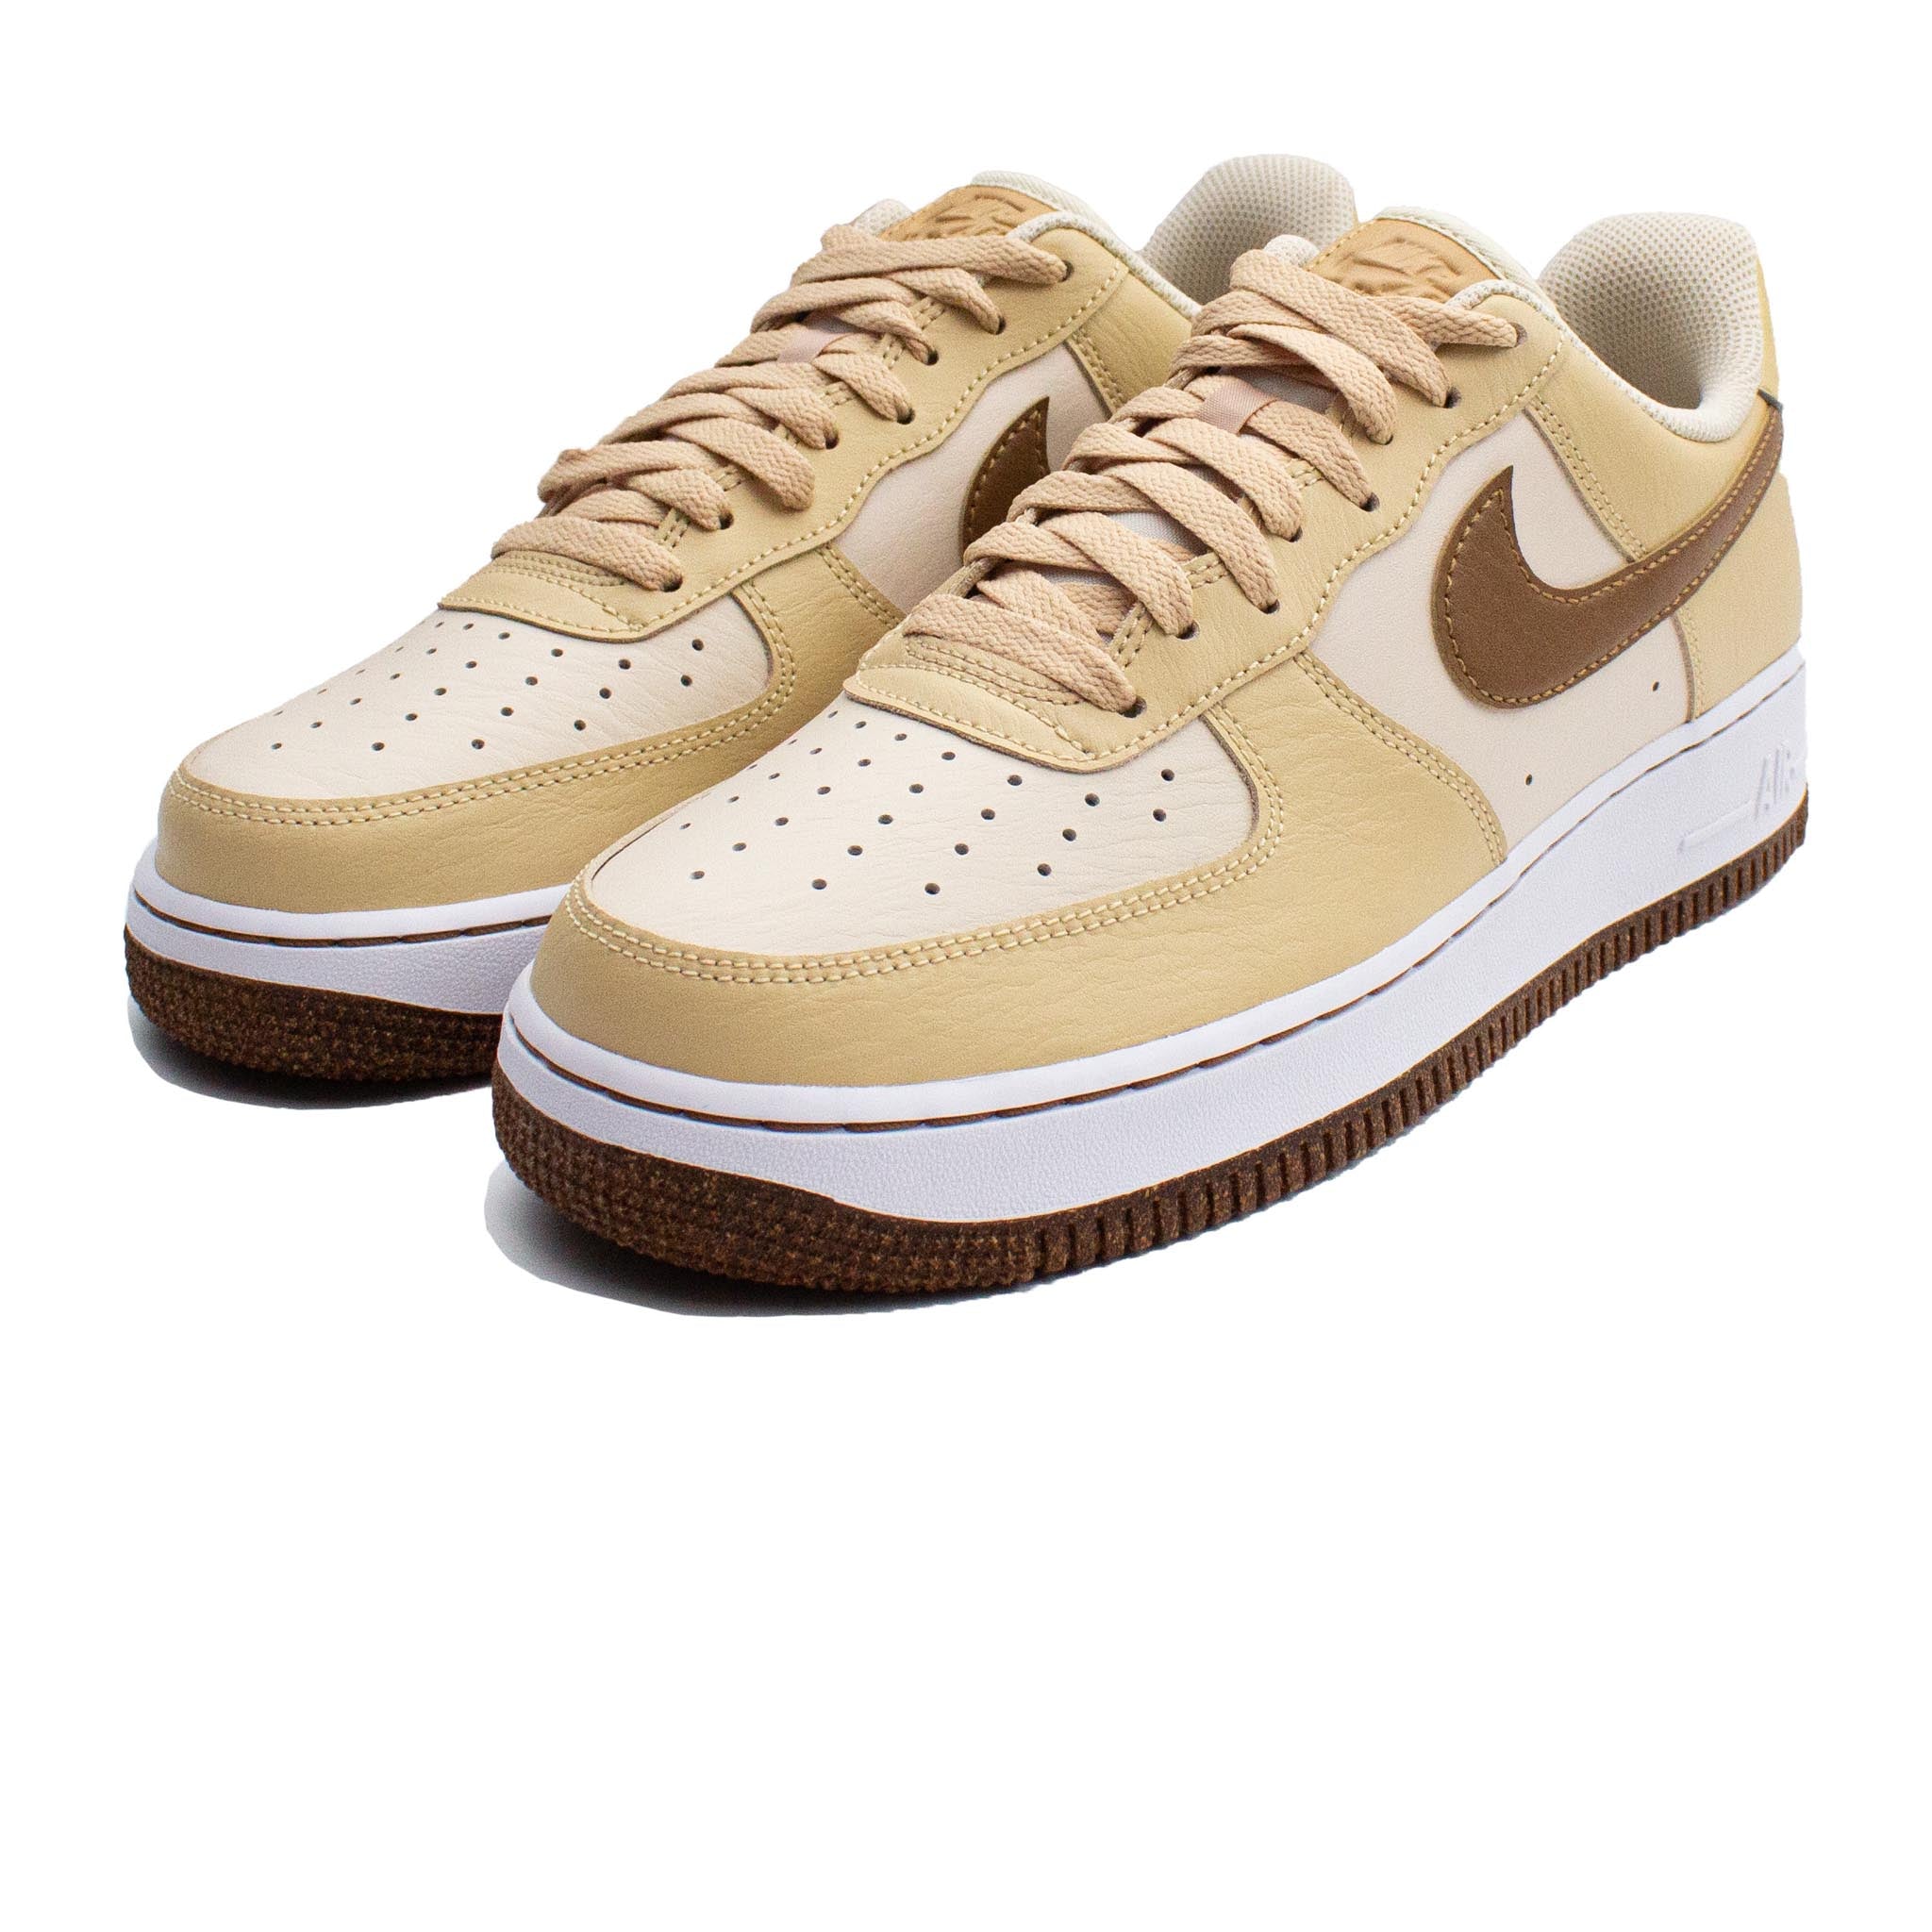 Nike Air Force 1 '07 LV8 'Inspected By Swoosh